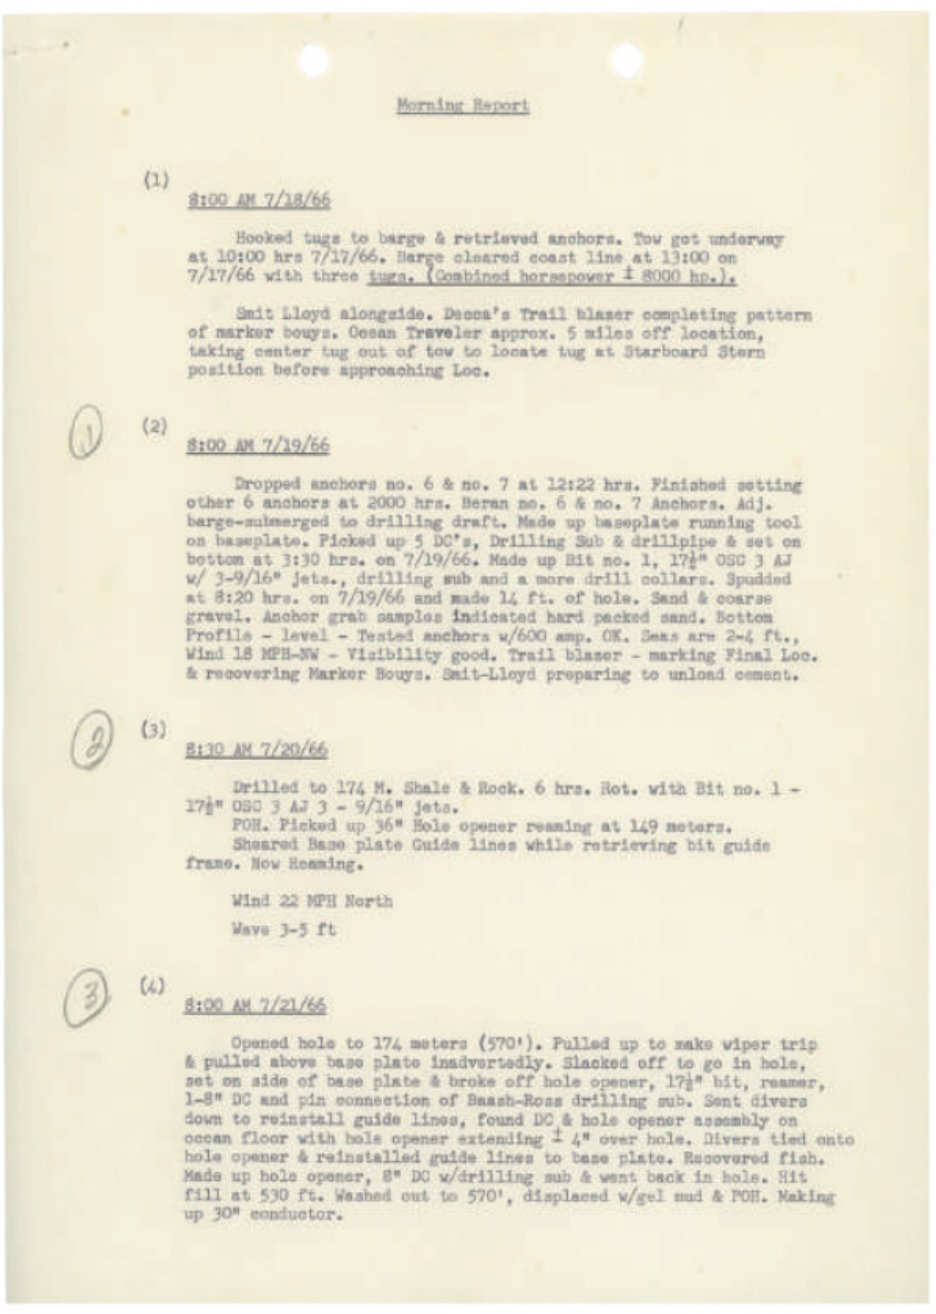 Regional State Archive of Stavanger, First oil drilling on the Norwegian shelf, Morning Reports - page 1, July 1966
